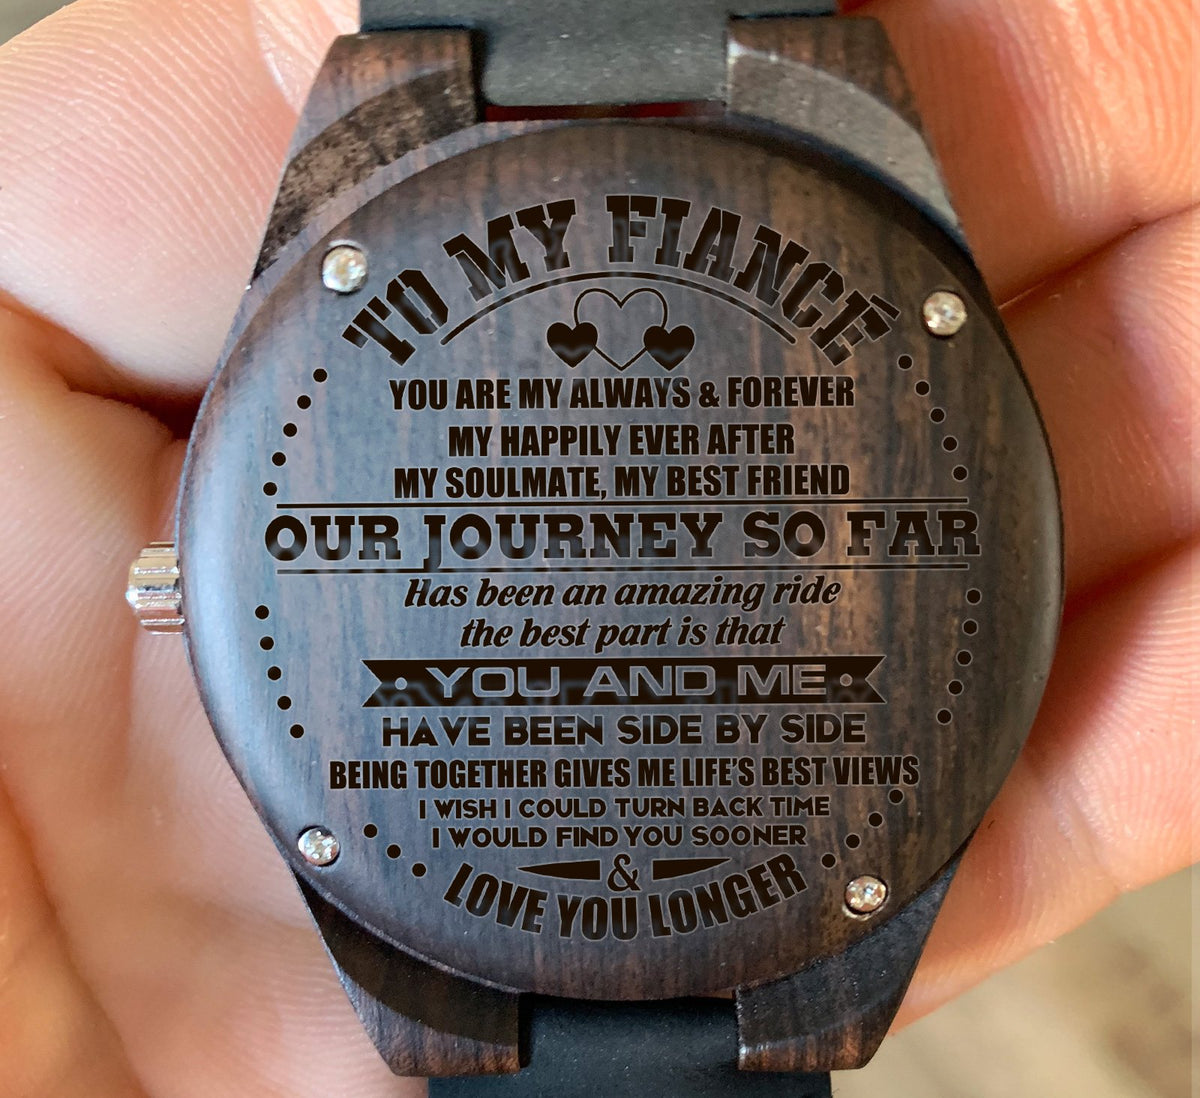 To My Fiance - Our Journey So Far Has Been An Amazing Ride - Wooden Watch